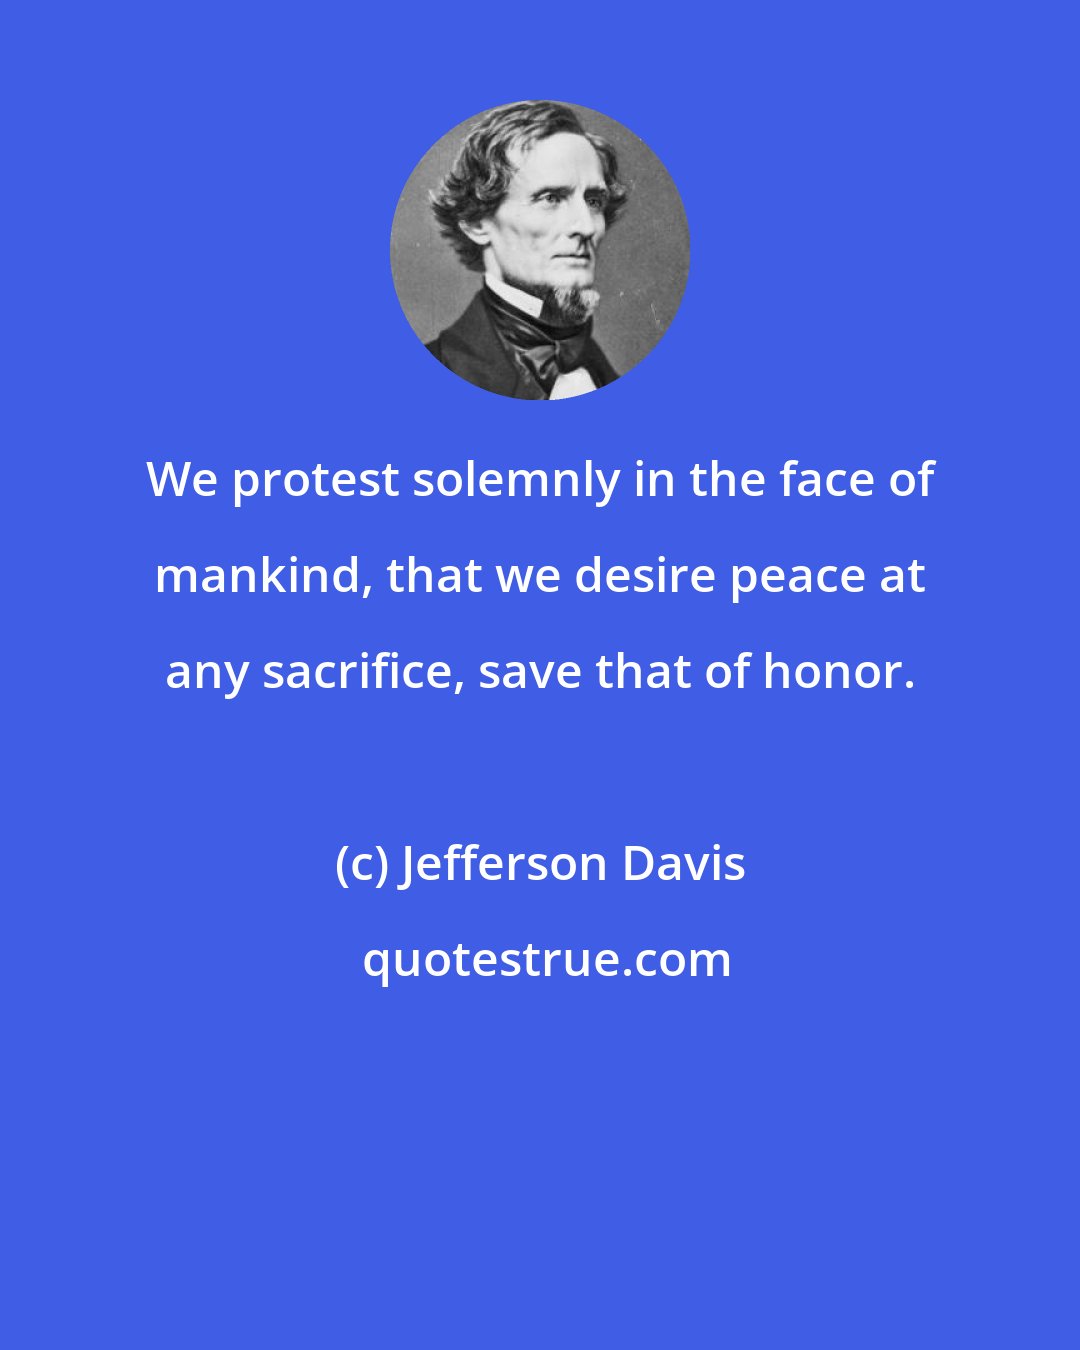 Jefferson Davis: We protest solemnly in the face of mankind, that we desire peace at any sacrifice, save that of honor.